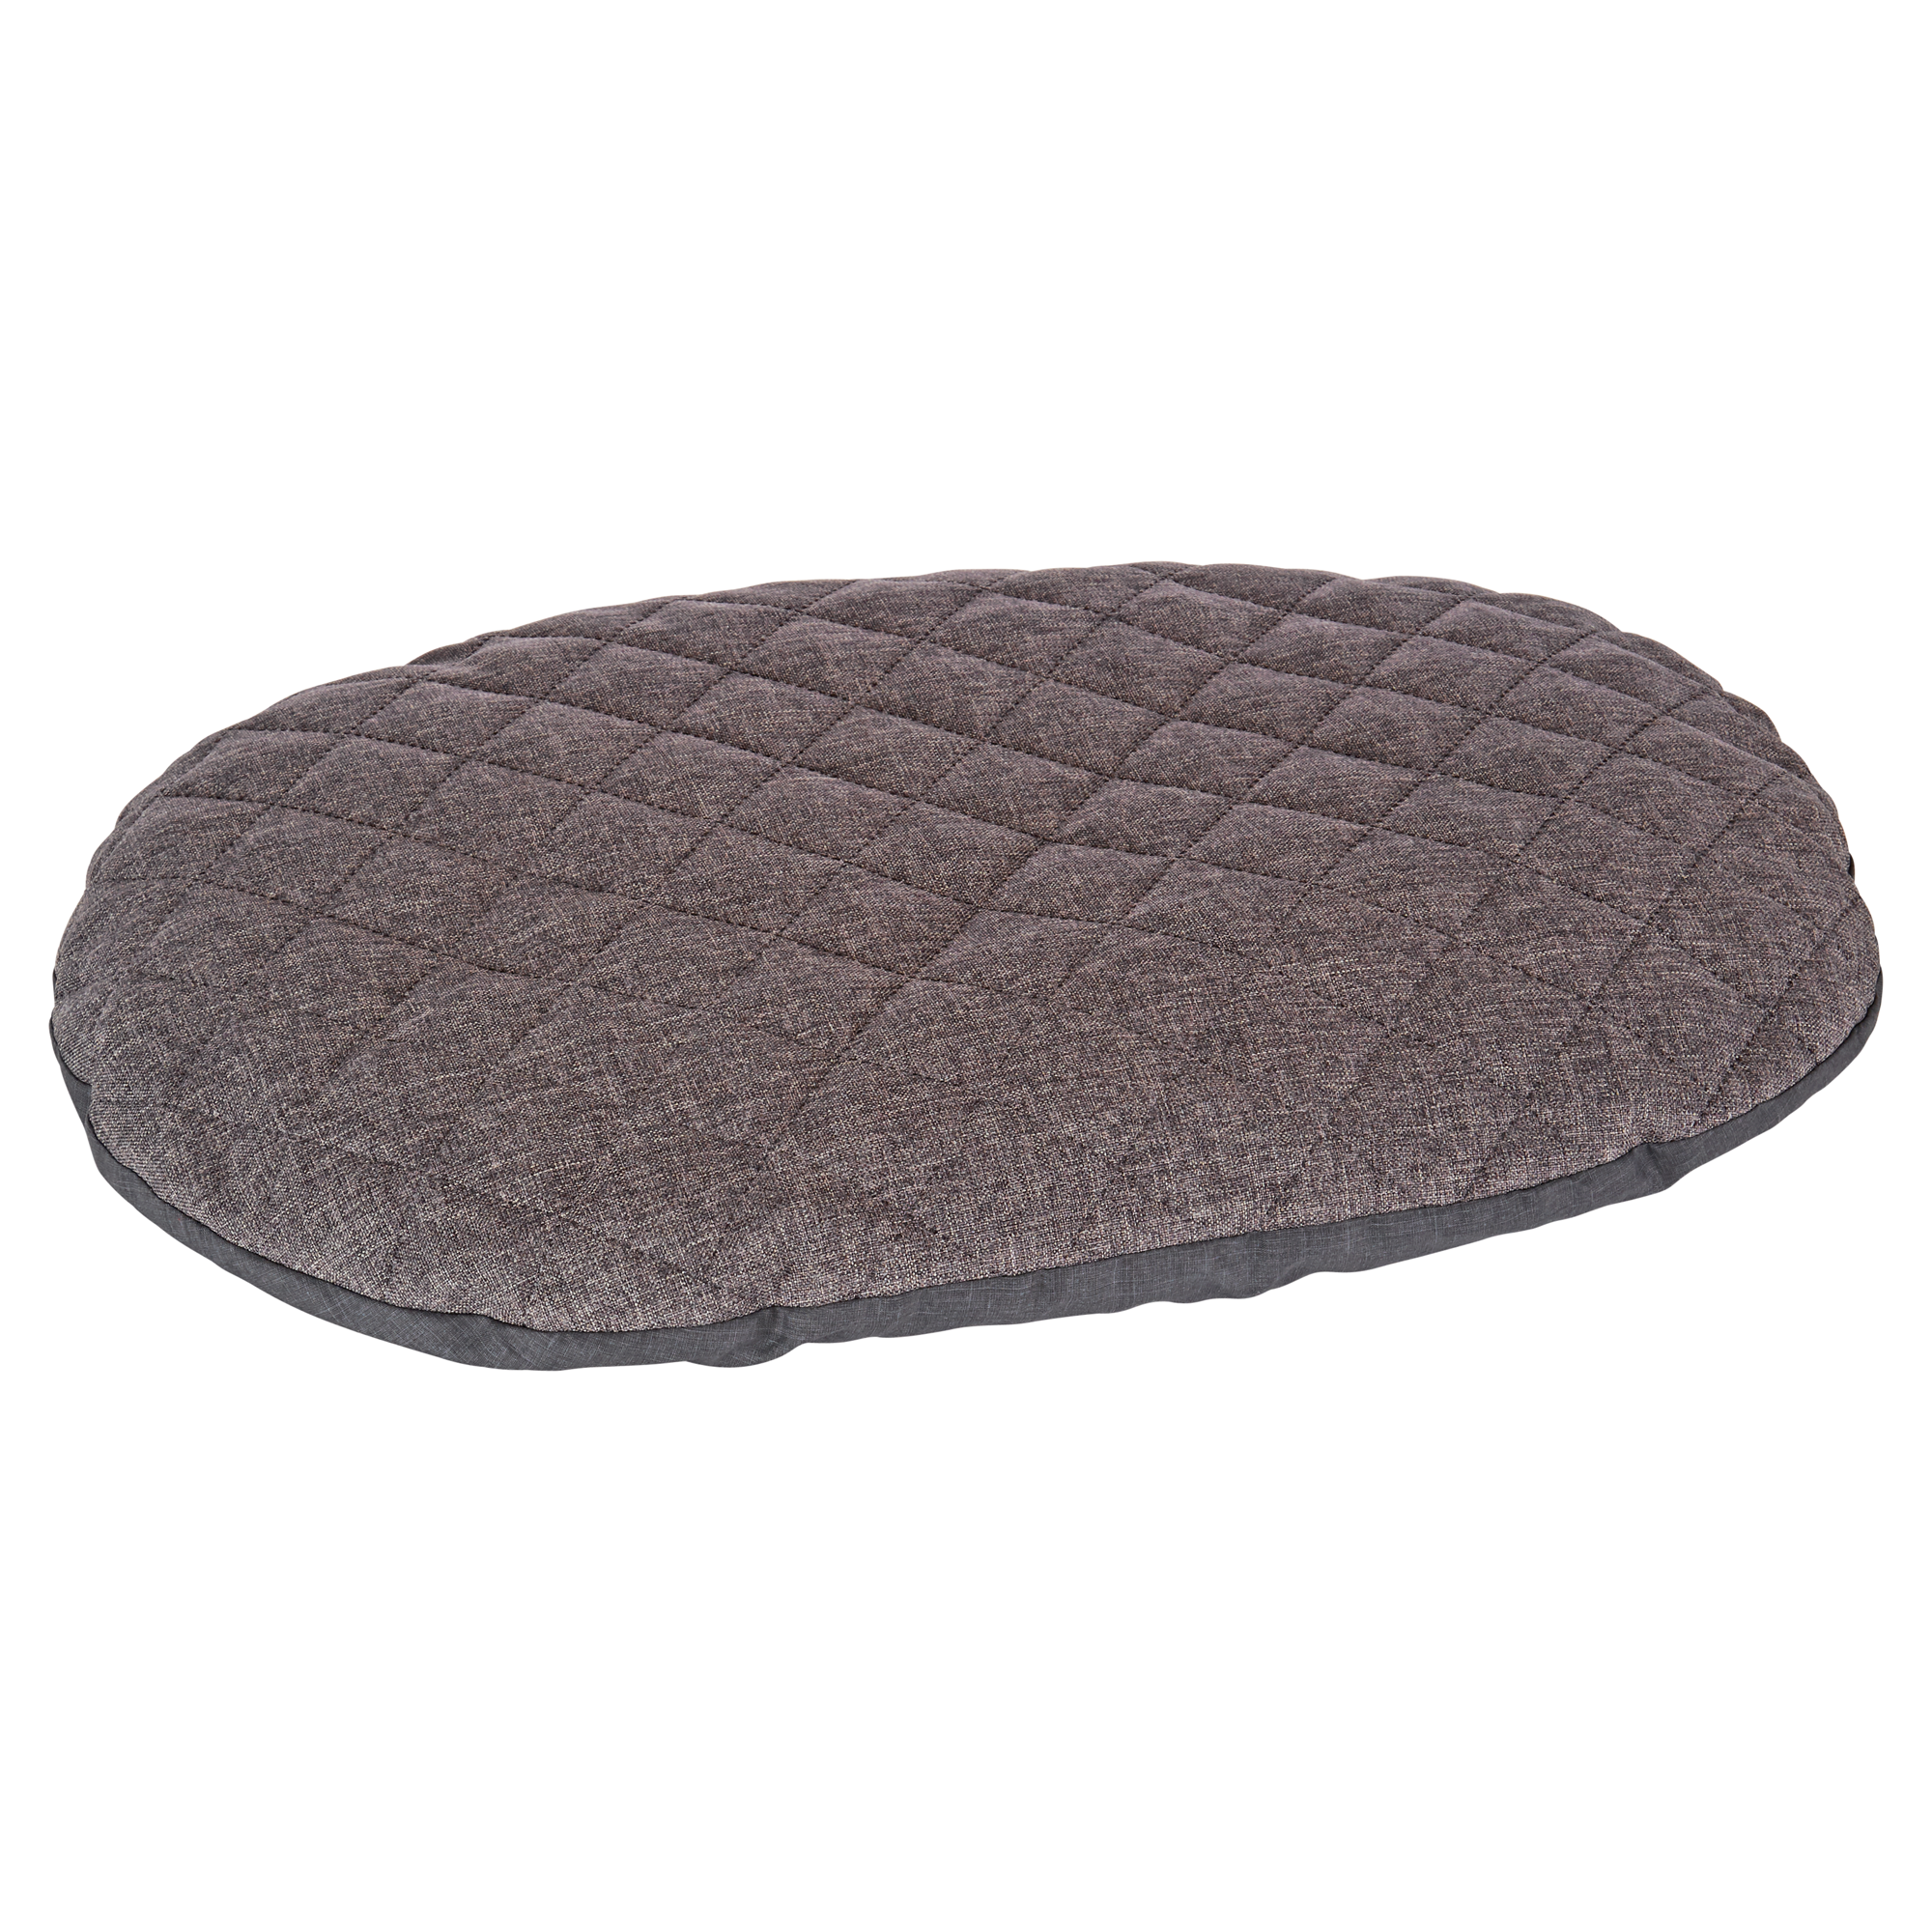 Hundekissen "Mano" oval Polyester/Baumwolle grau 60 cm + product picture